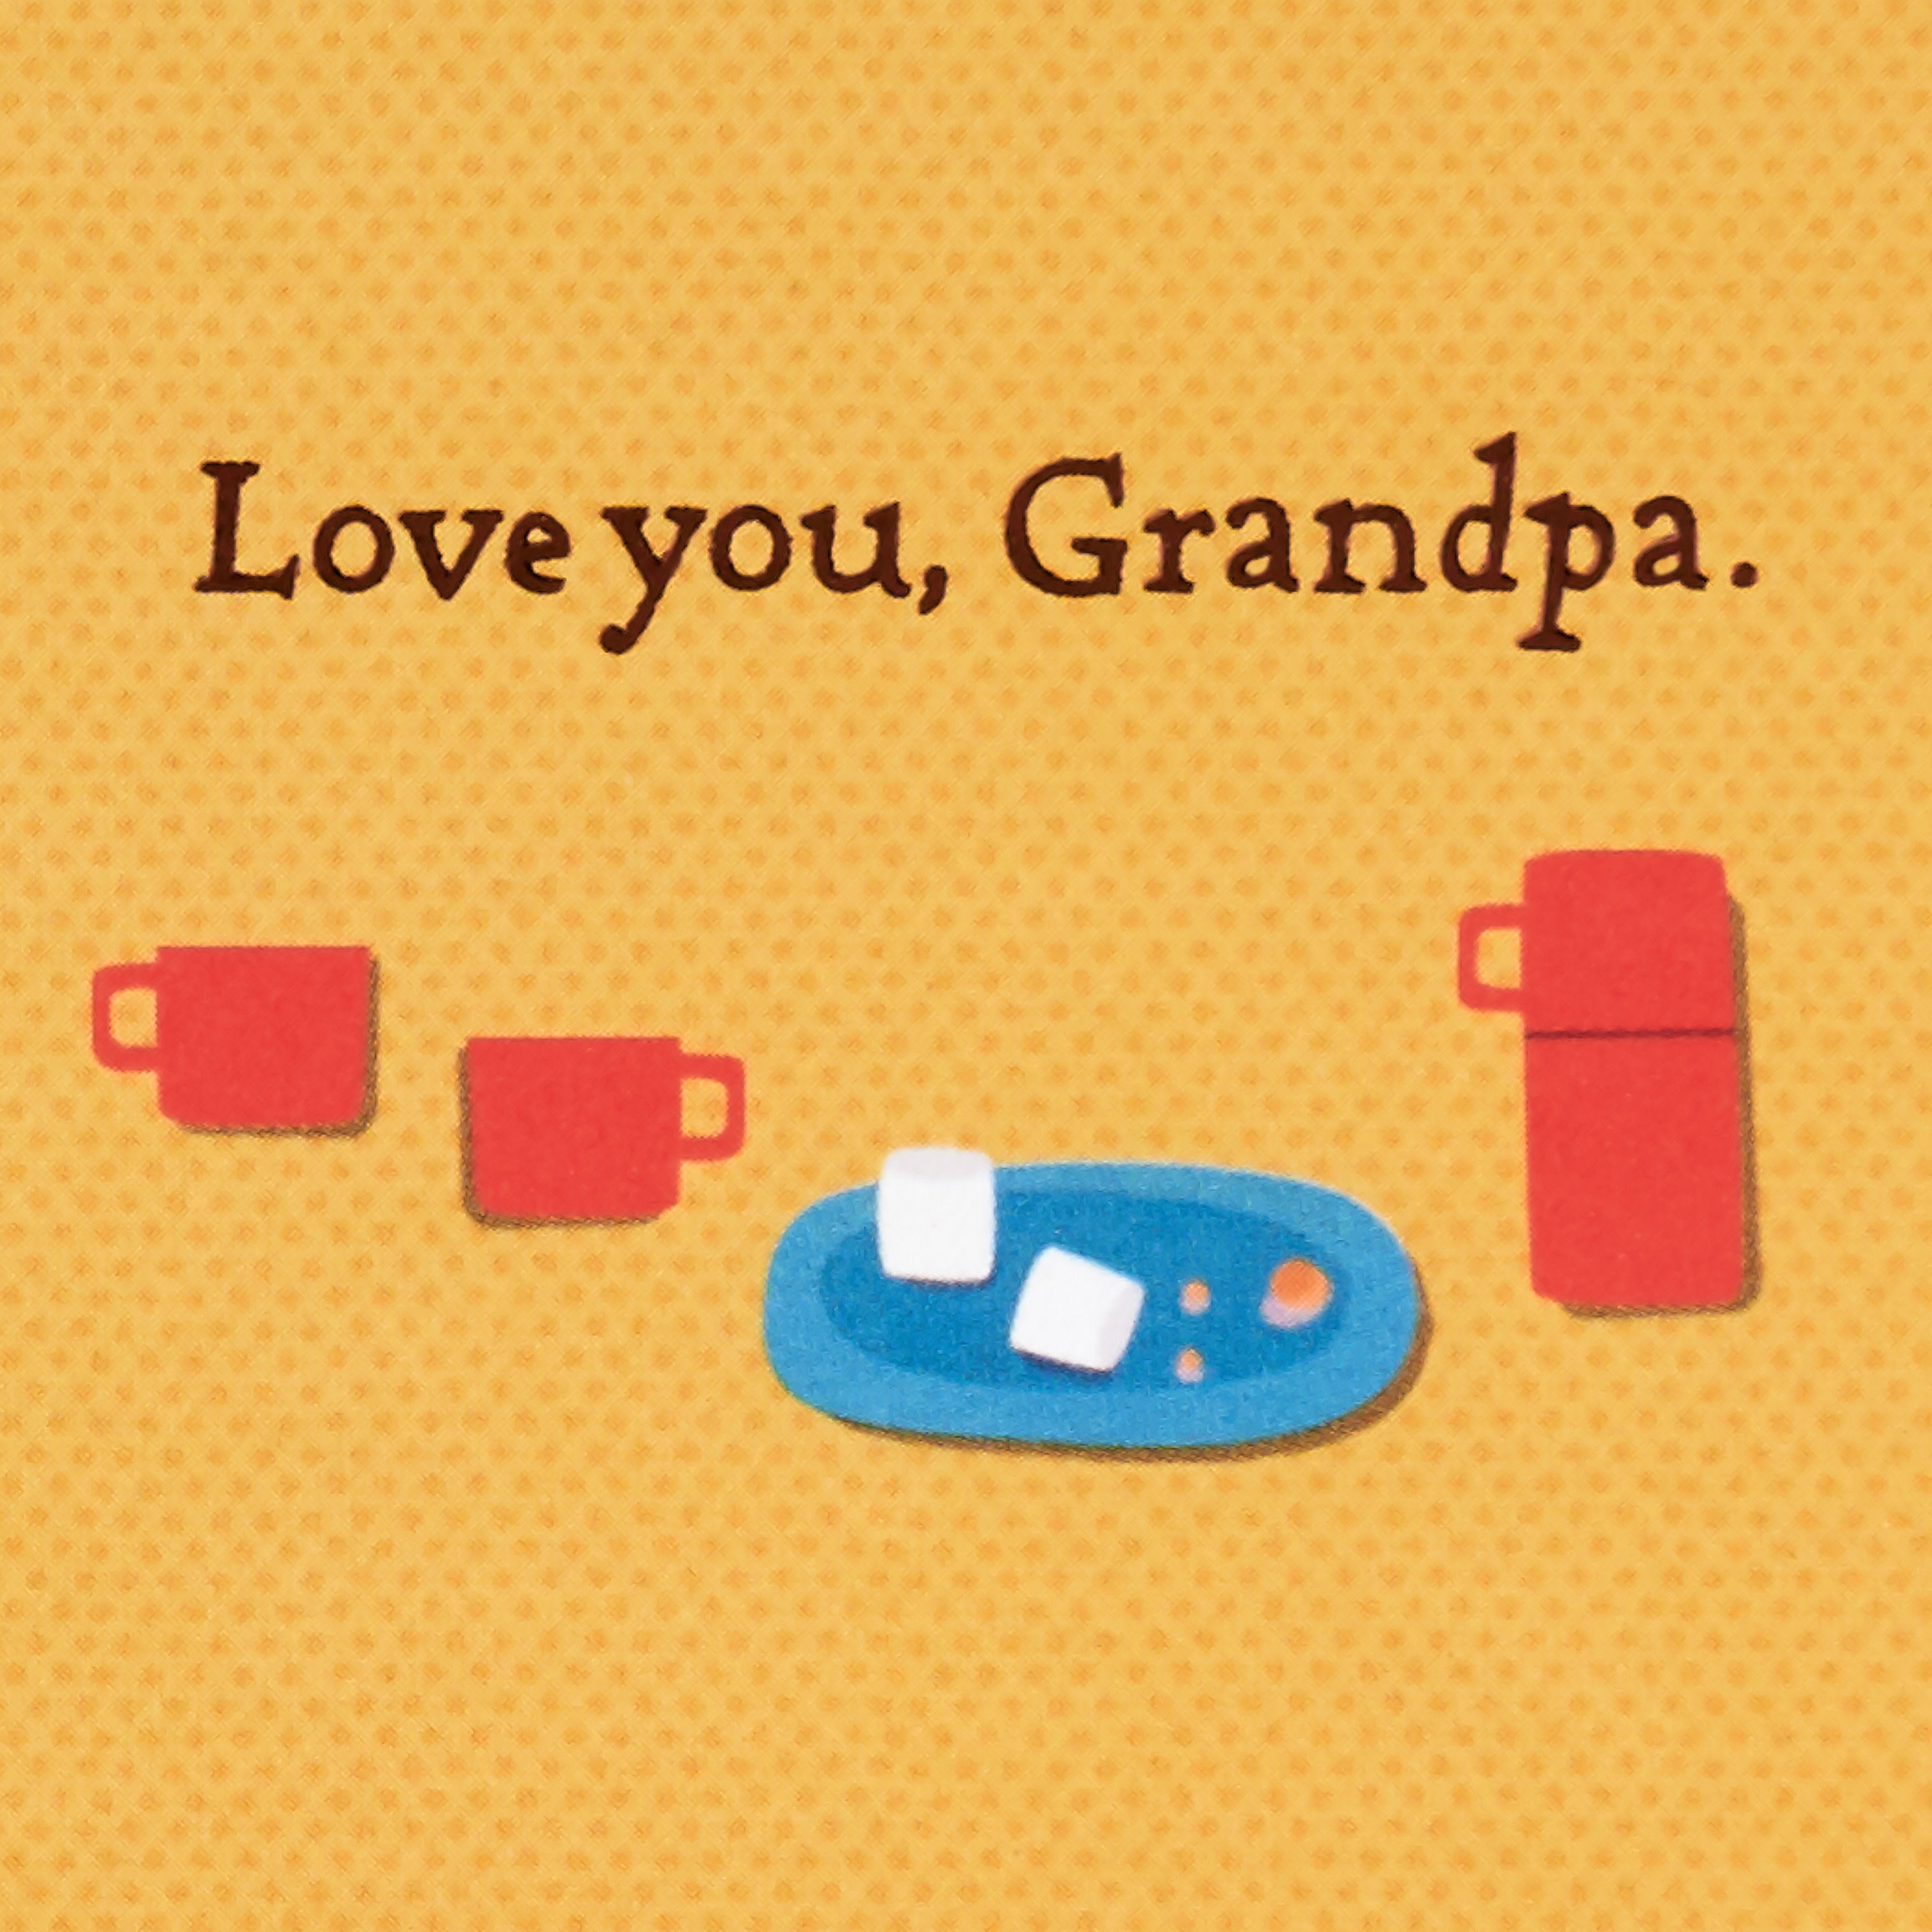 Card for Grandpa (Bear Buddies) for Birthdays, Grandparent's Day, Father's Day, Valentine's Day